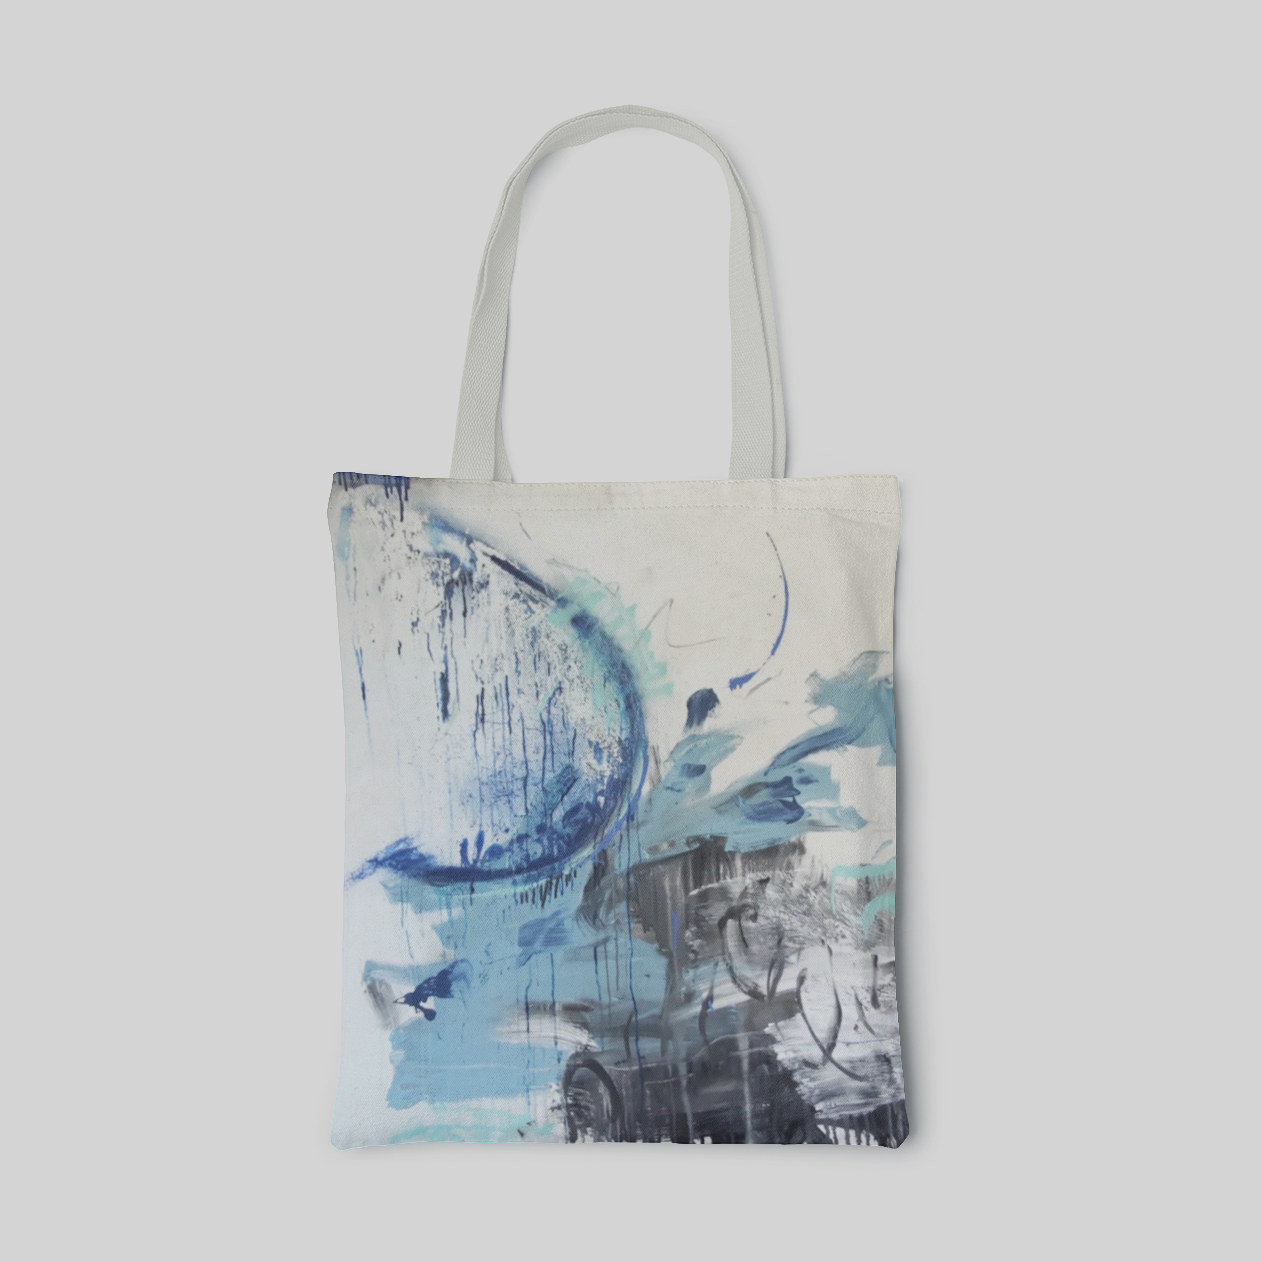 blanch abstract designed tote bag with blue and black paint art, front side